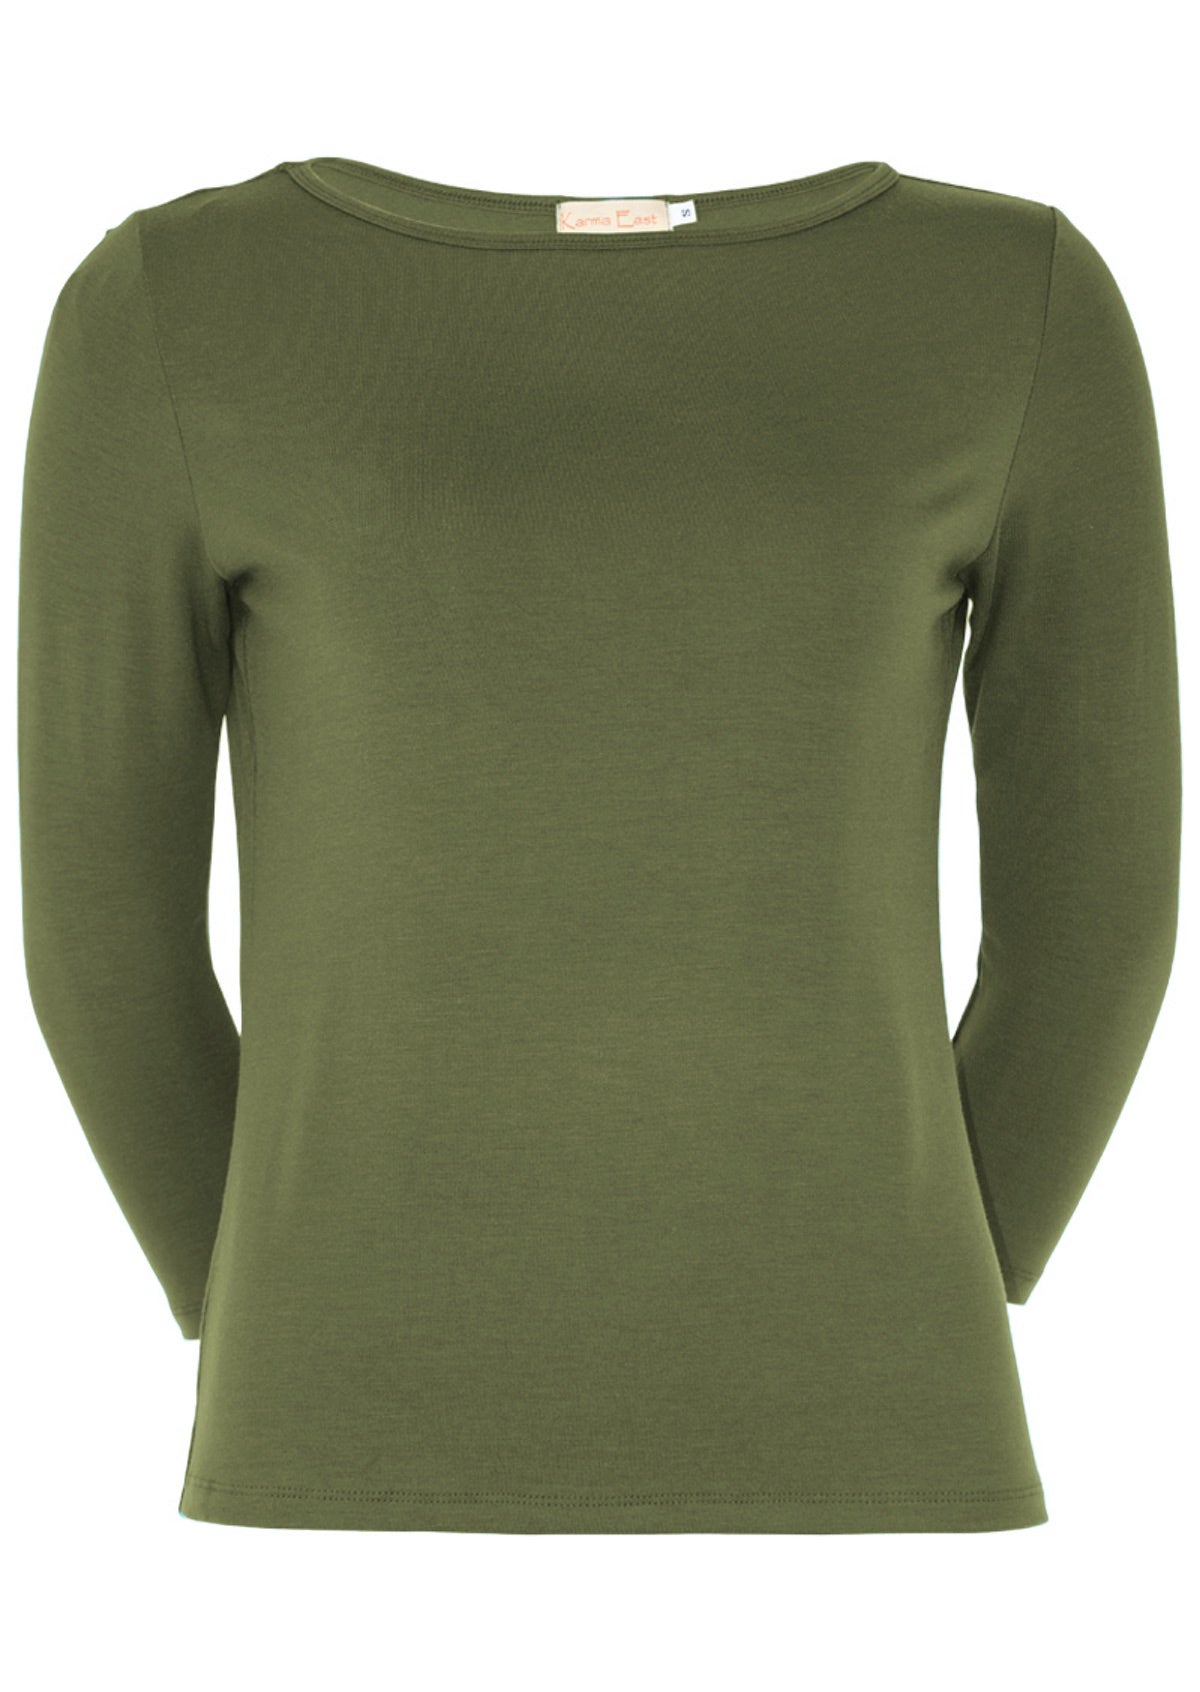 Front view of a women's rayon boat neck olive green 3/4 sleeve top.